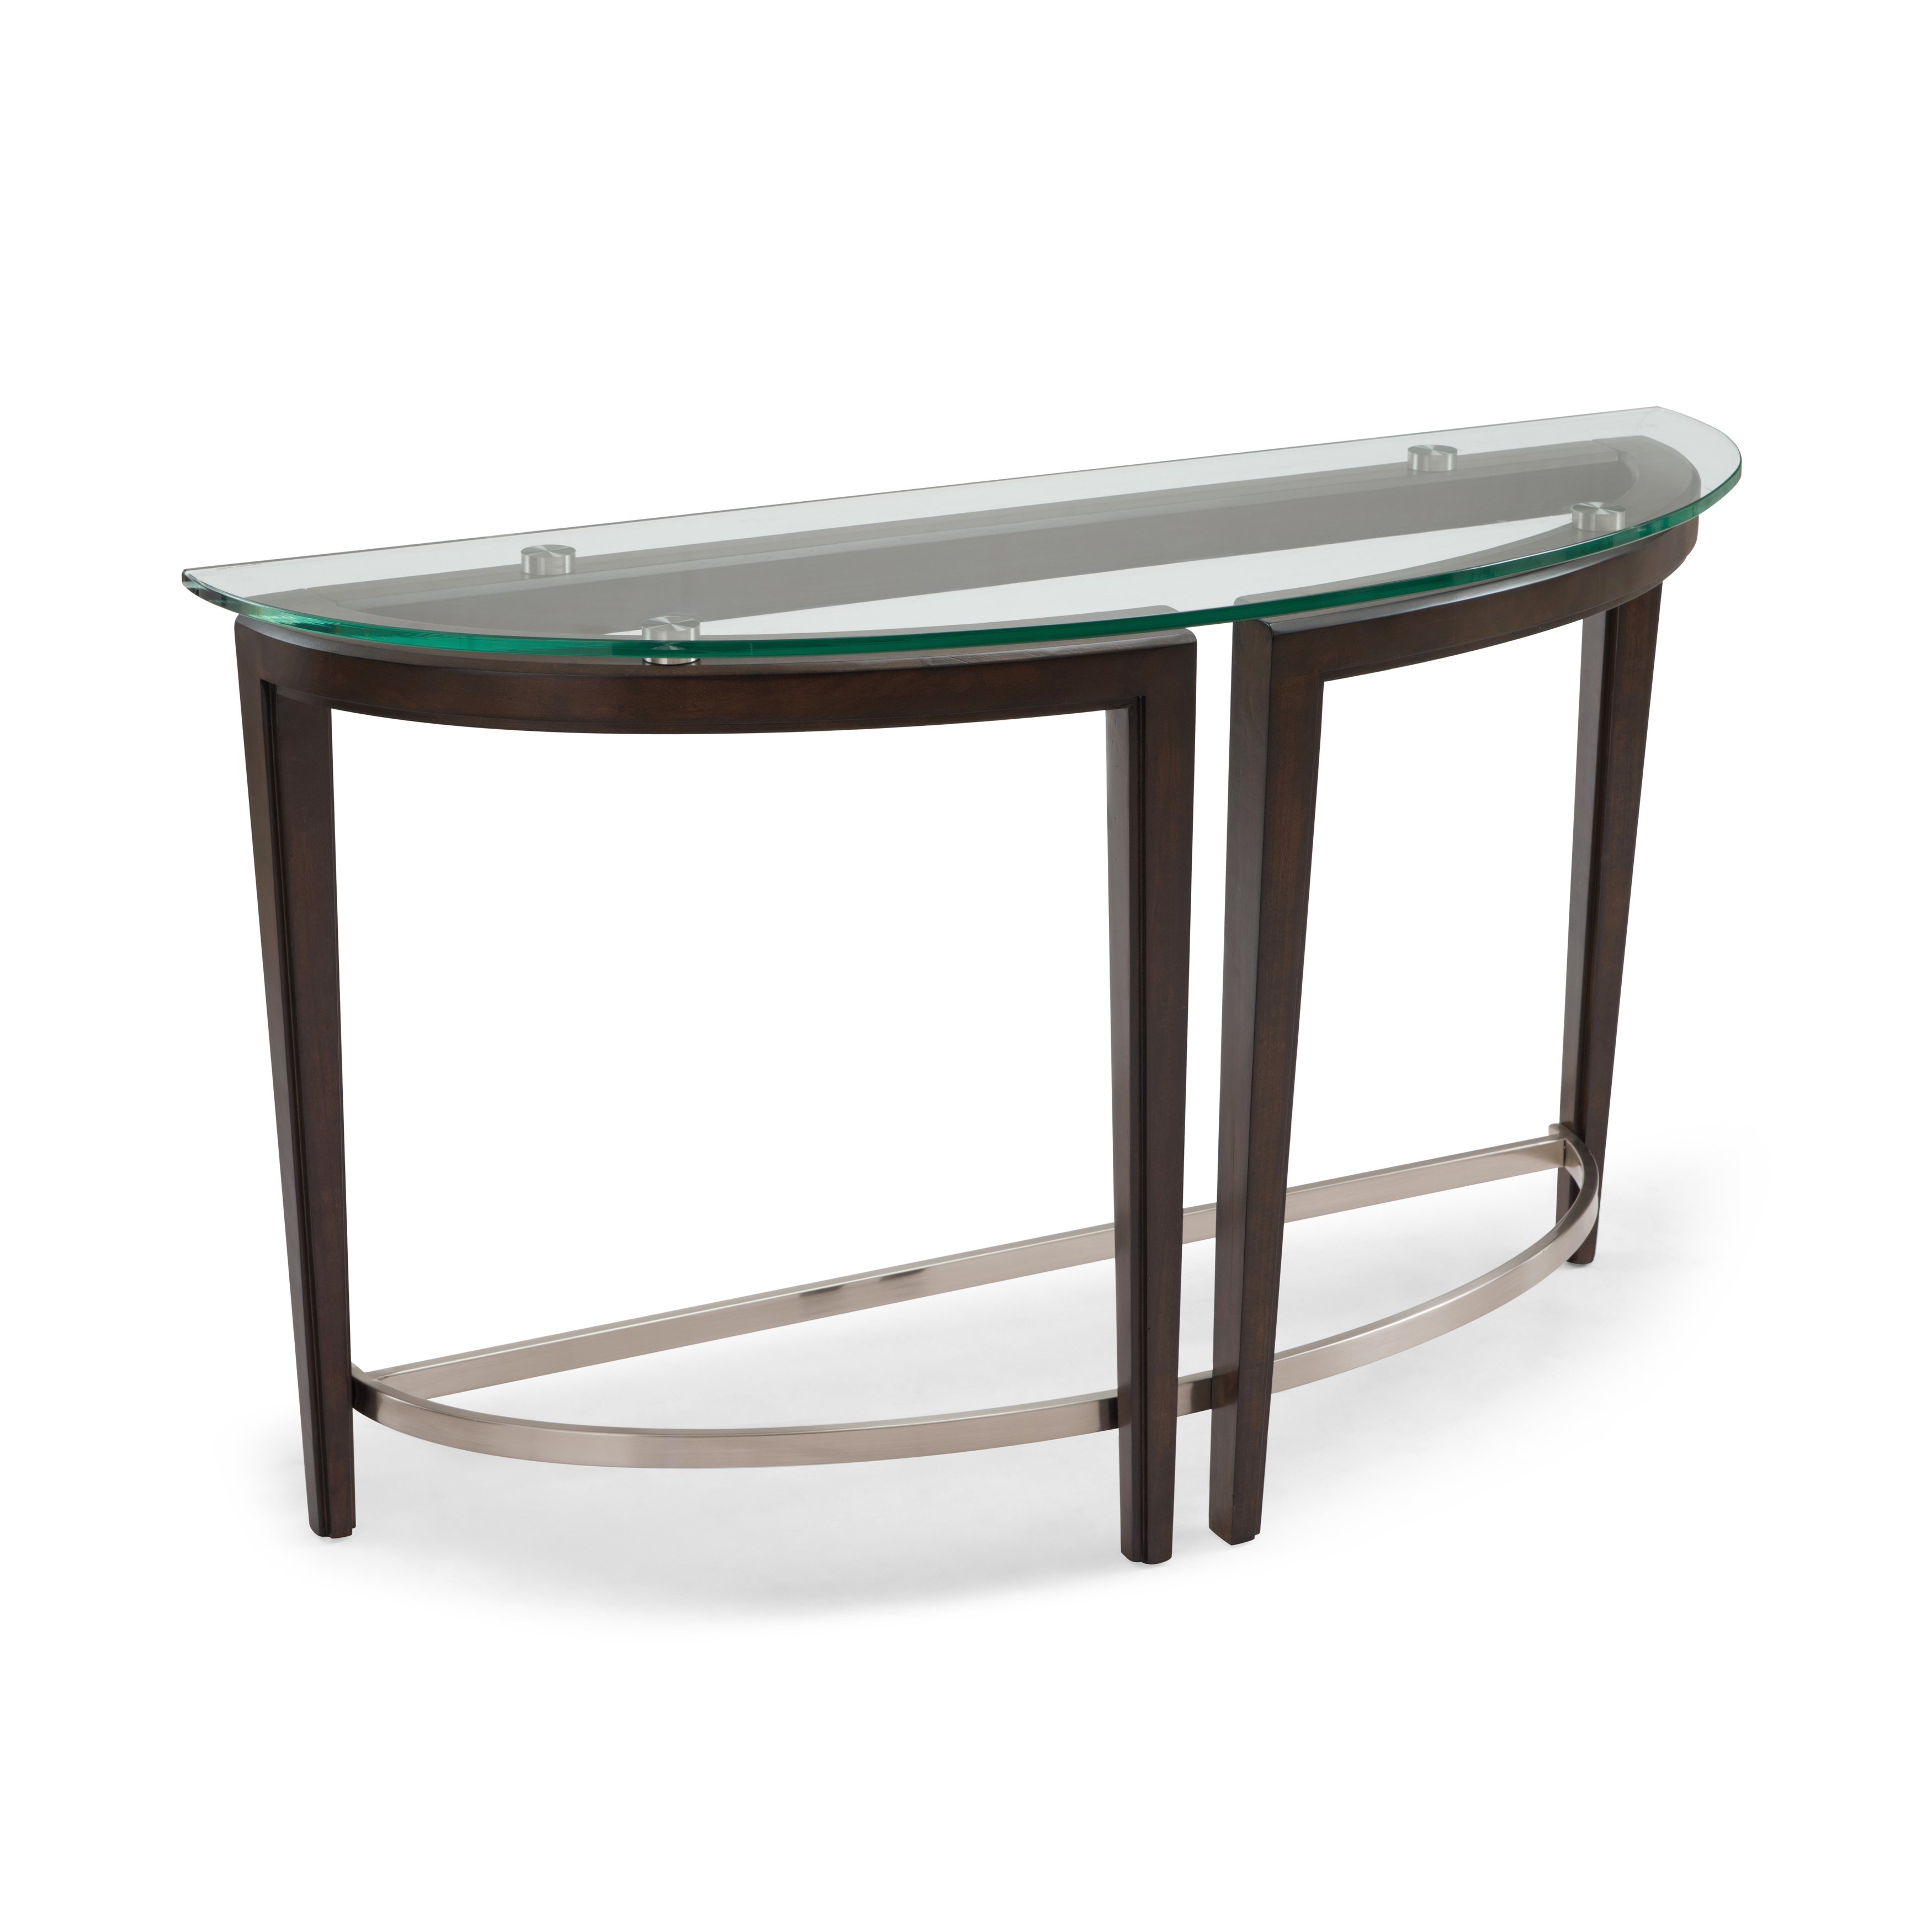 carmen contemporary hazelnut demilune glass top console table magnussen sofa metal accent free shipping today cabinet inch round basket coffee kitchen and chairs person bar height